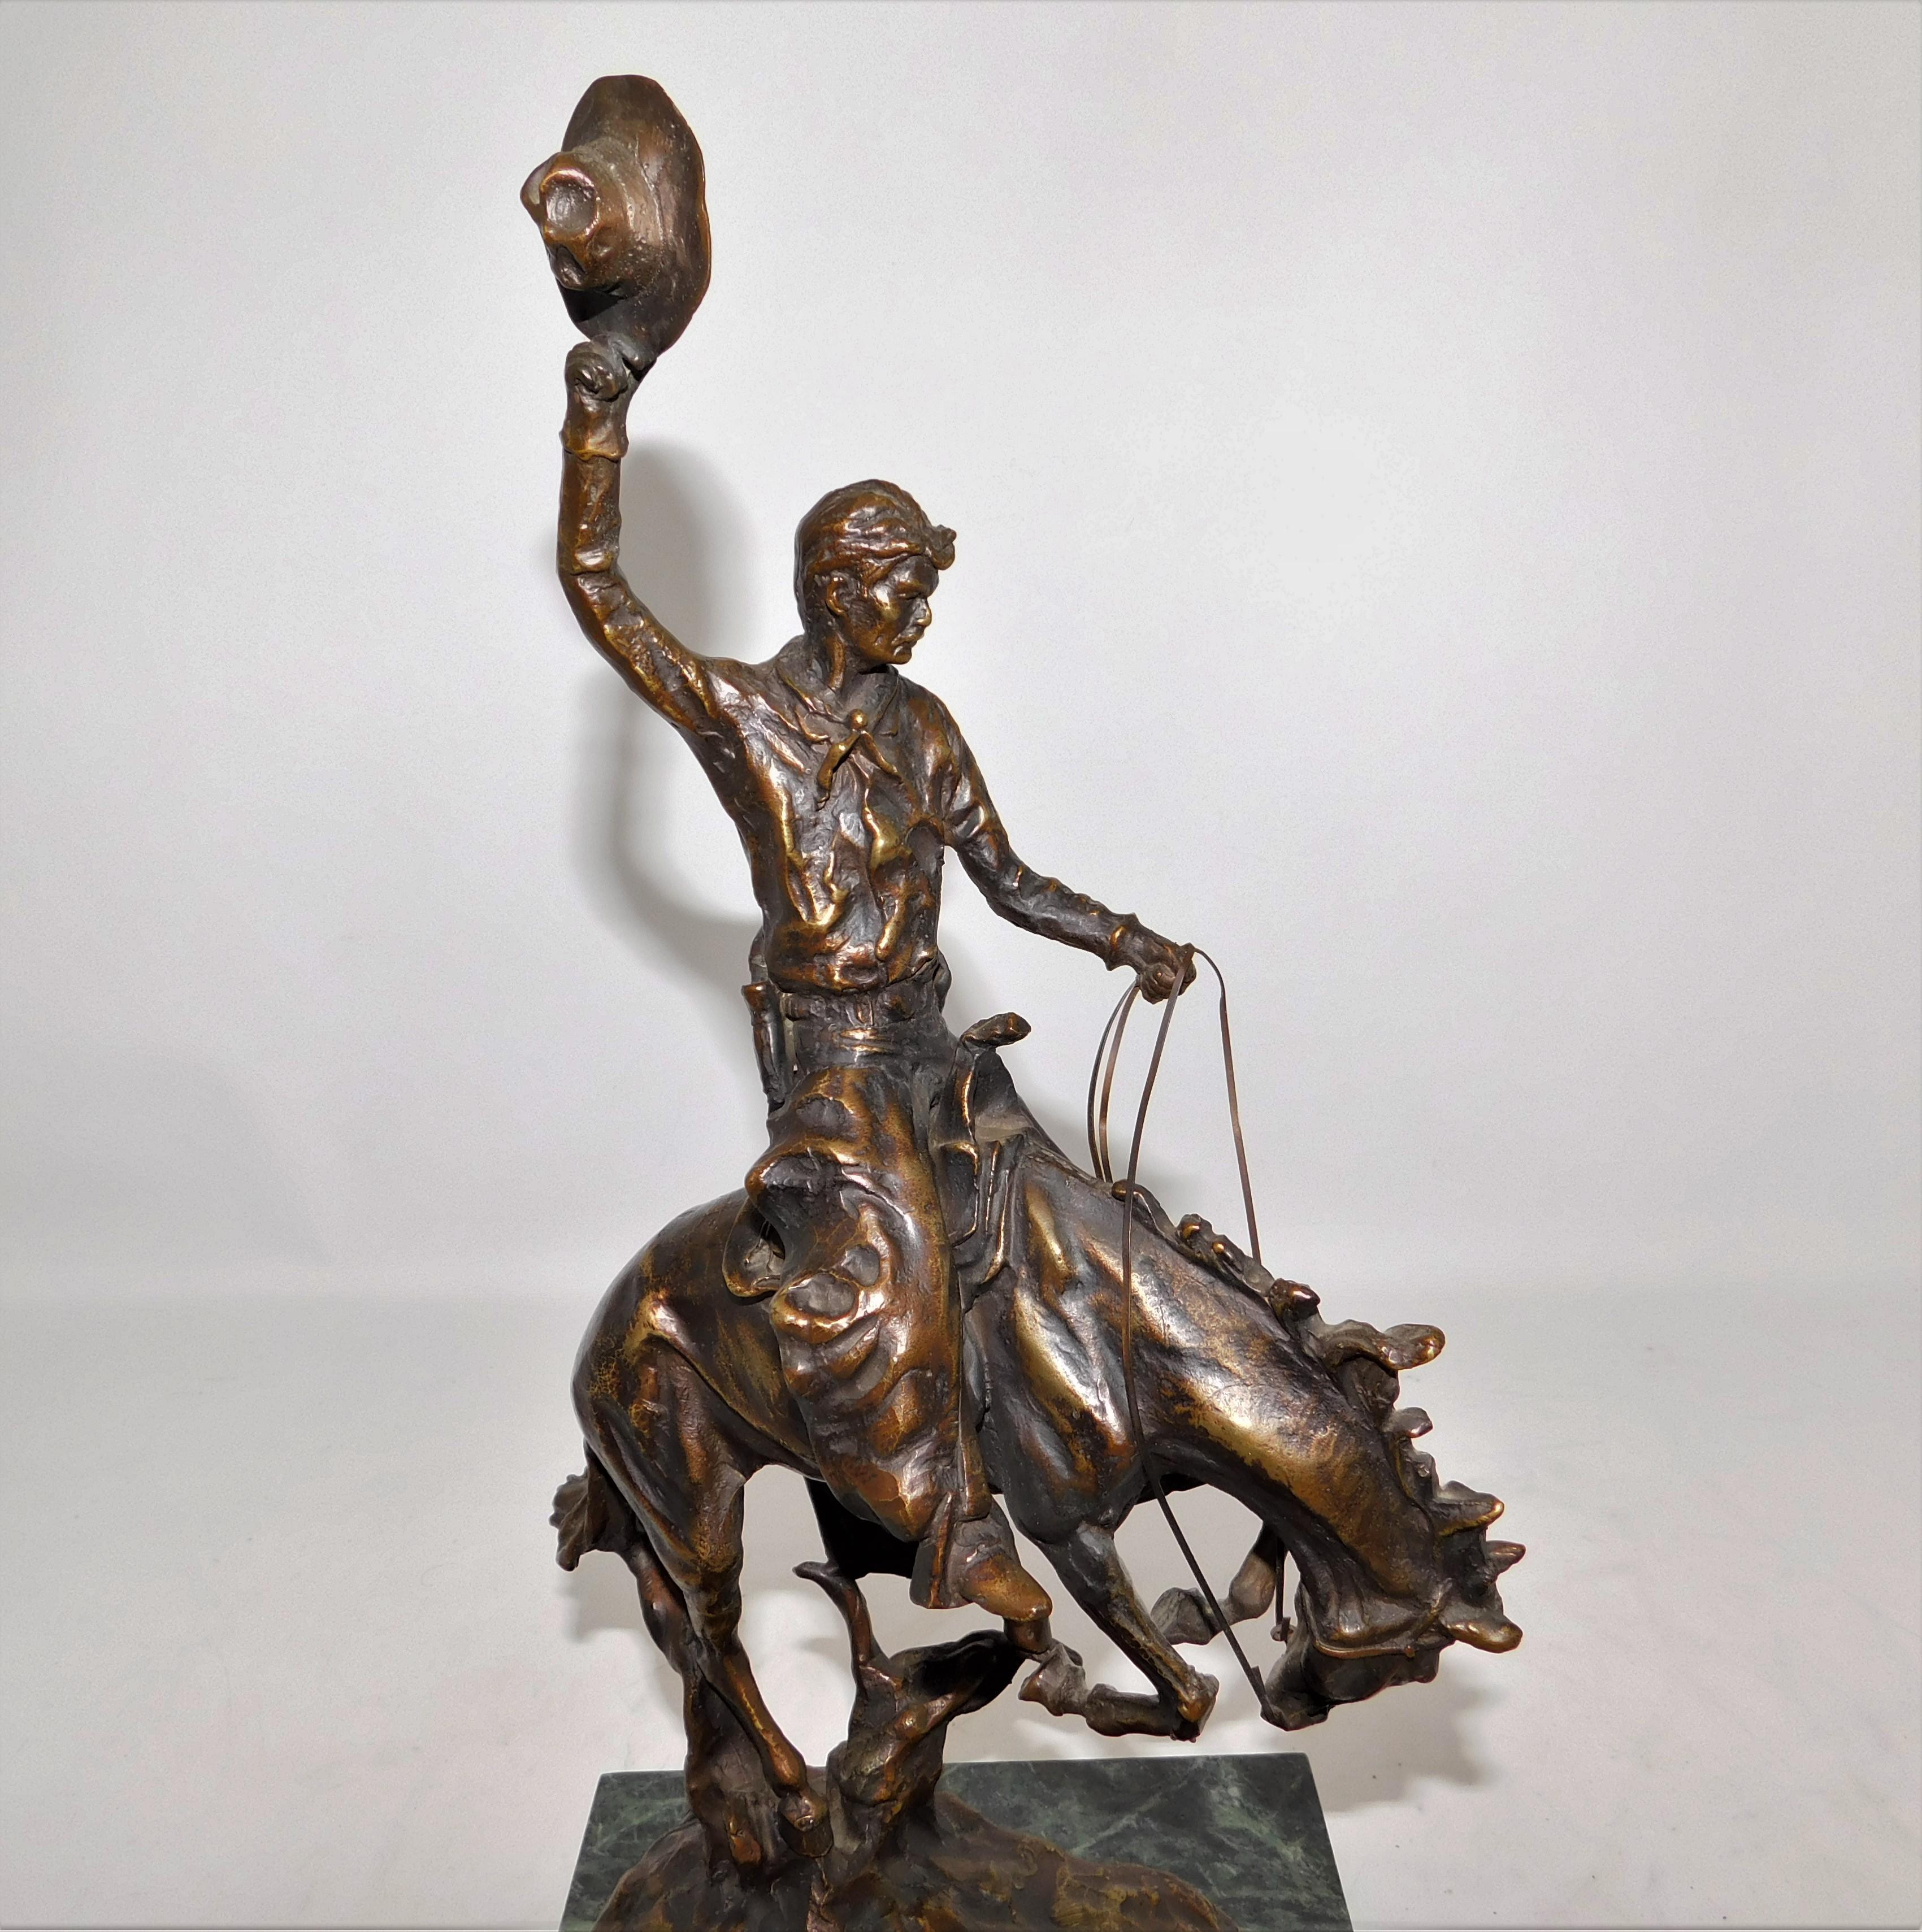 Early 20th century bronze on Marble slab sculpture of a bronco rodeo cowboy on horse by Austrian artist Carl Kauba. Weighing a heavy 18 pounds with a solid marble base, Kauba has amazing intricate detail from the reins to the cowboys face and horses